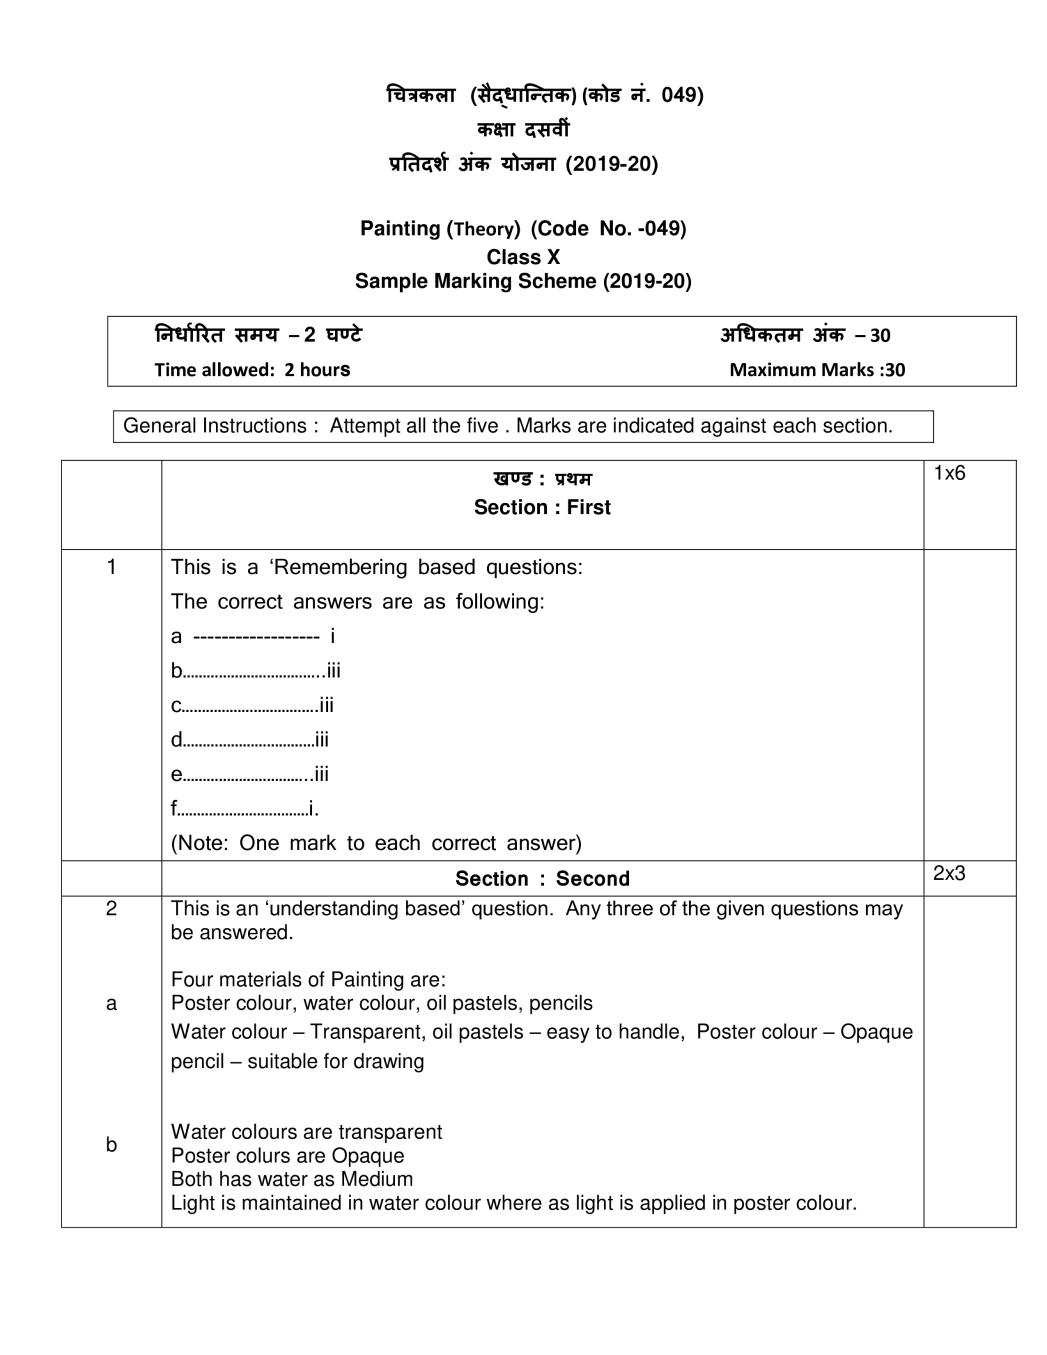 CBSE Class 10 Marking Scheme 2020 for Painting - Page 1